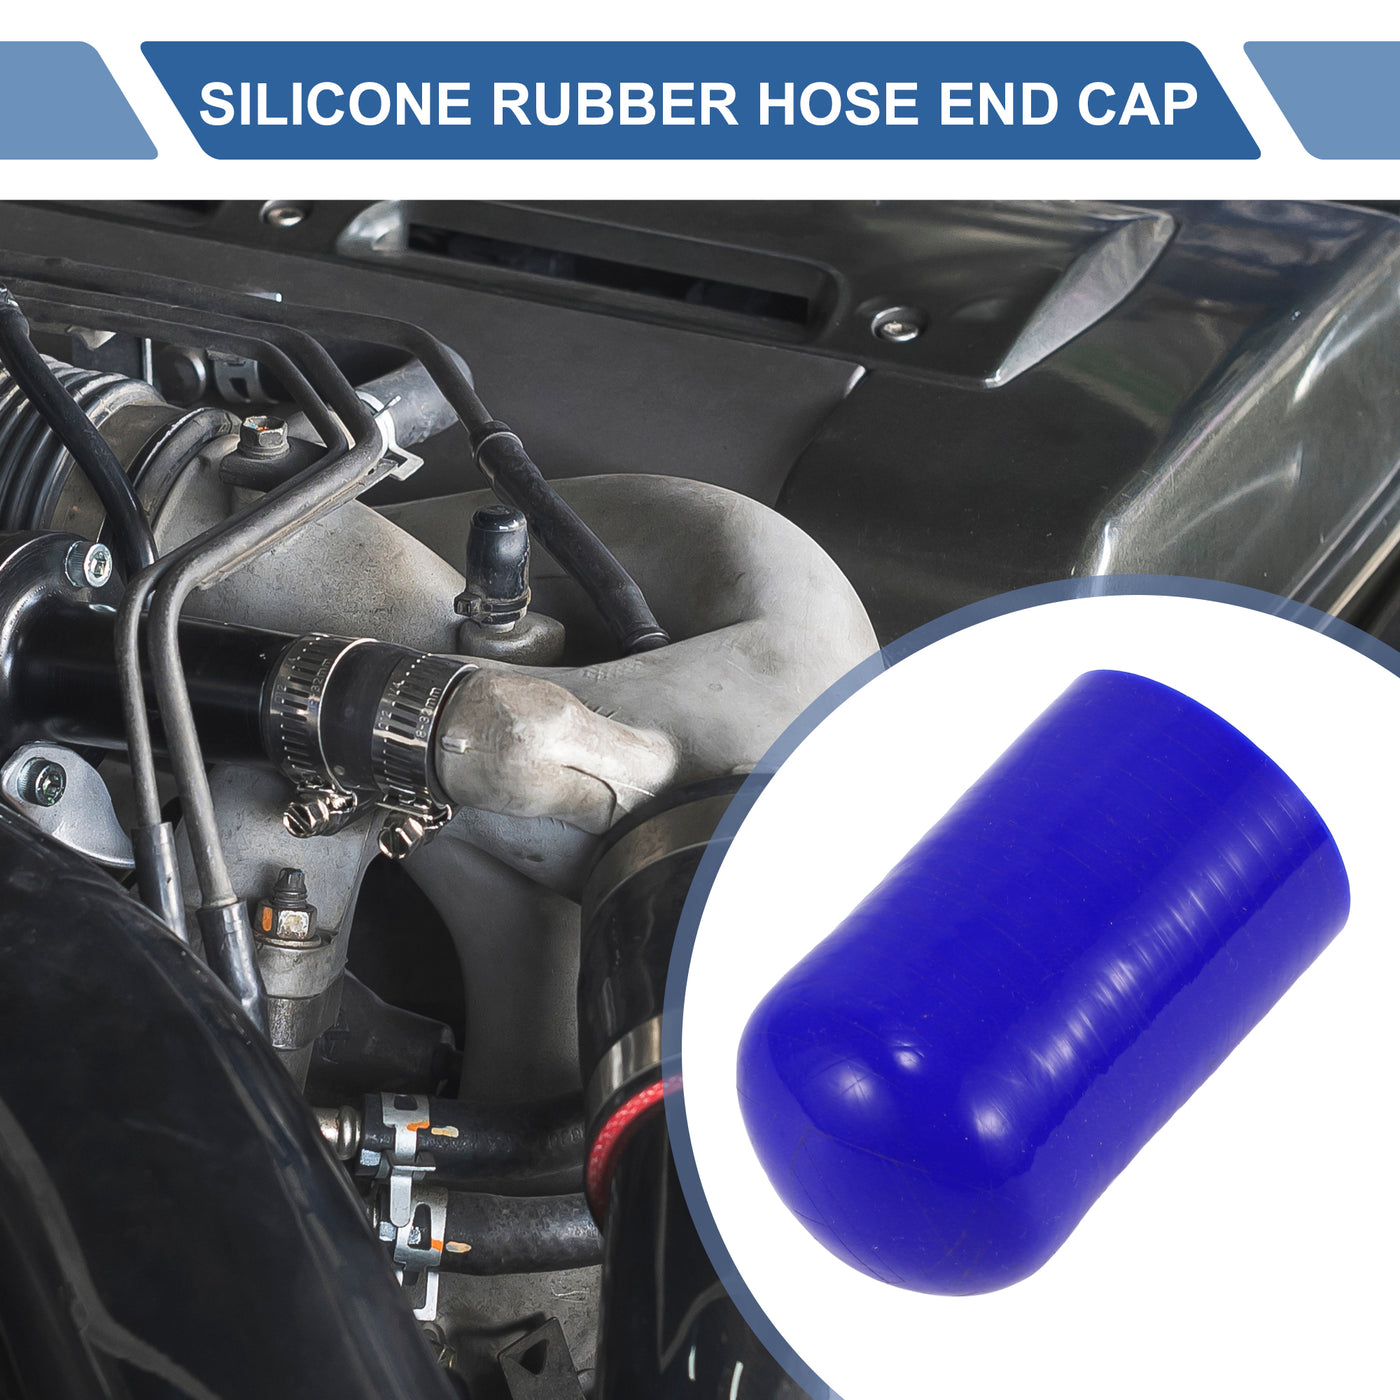 X AUTOHAUX 1 Pcs 60mm Length 38mm/1.50" ID Blue Car Silicone Rubber Hose End Cap with Clamp Silicone Reinforced Blanking Cap for Bypass Tube Universal